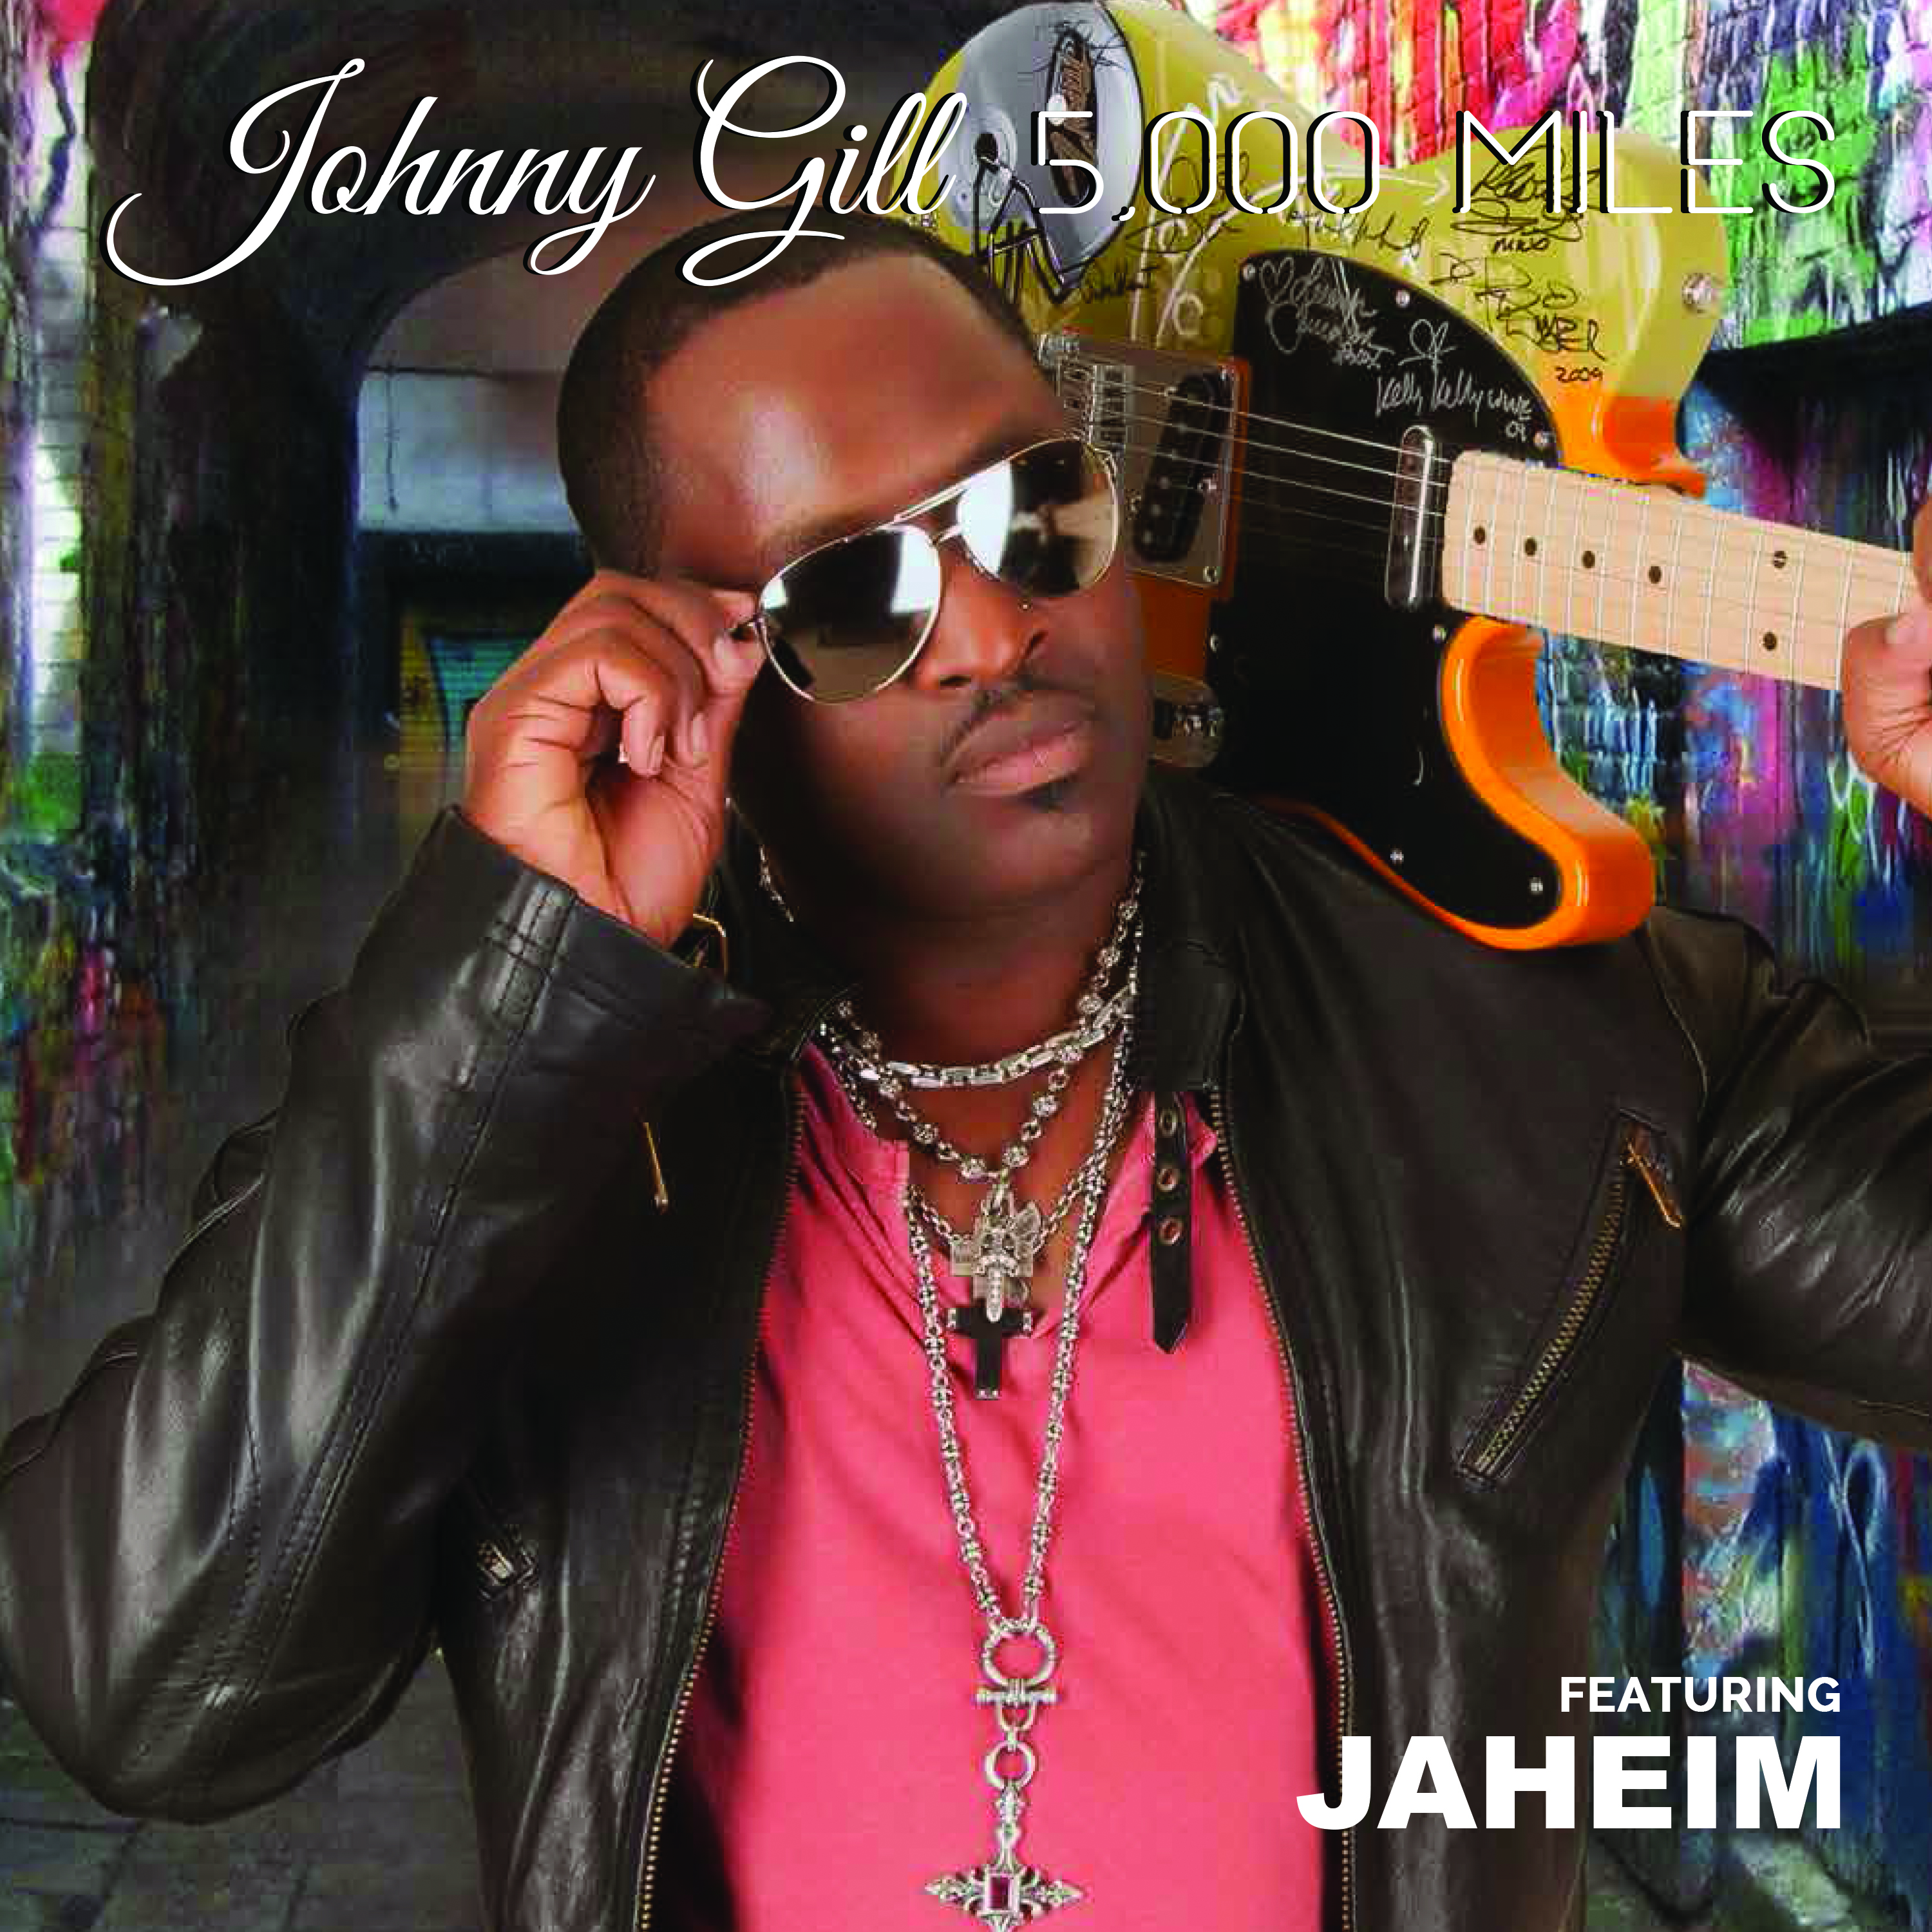 Johnny Gill Celebrates 4th Top 5 Hit From His “Game Changer” Album With “5000 Miles” featuring Jaheim